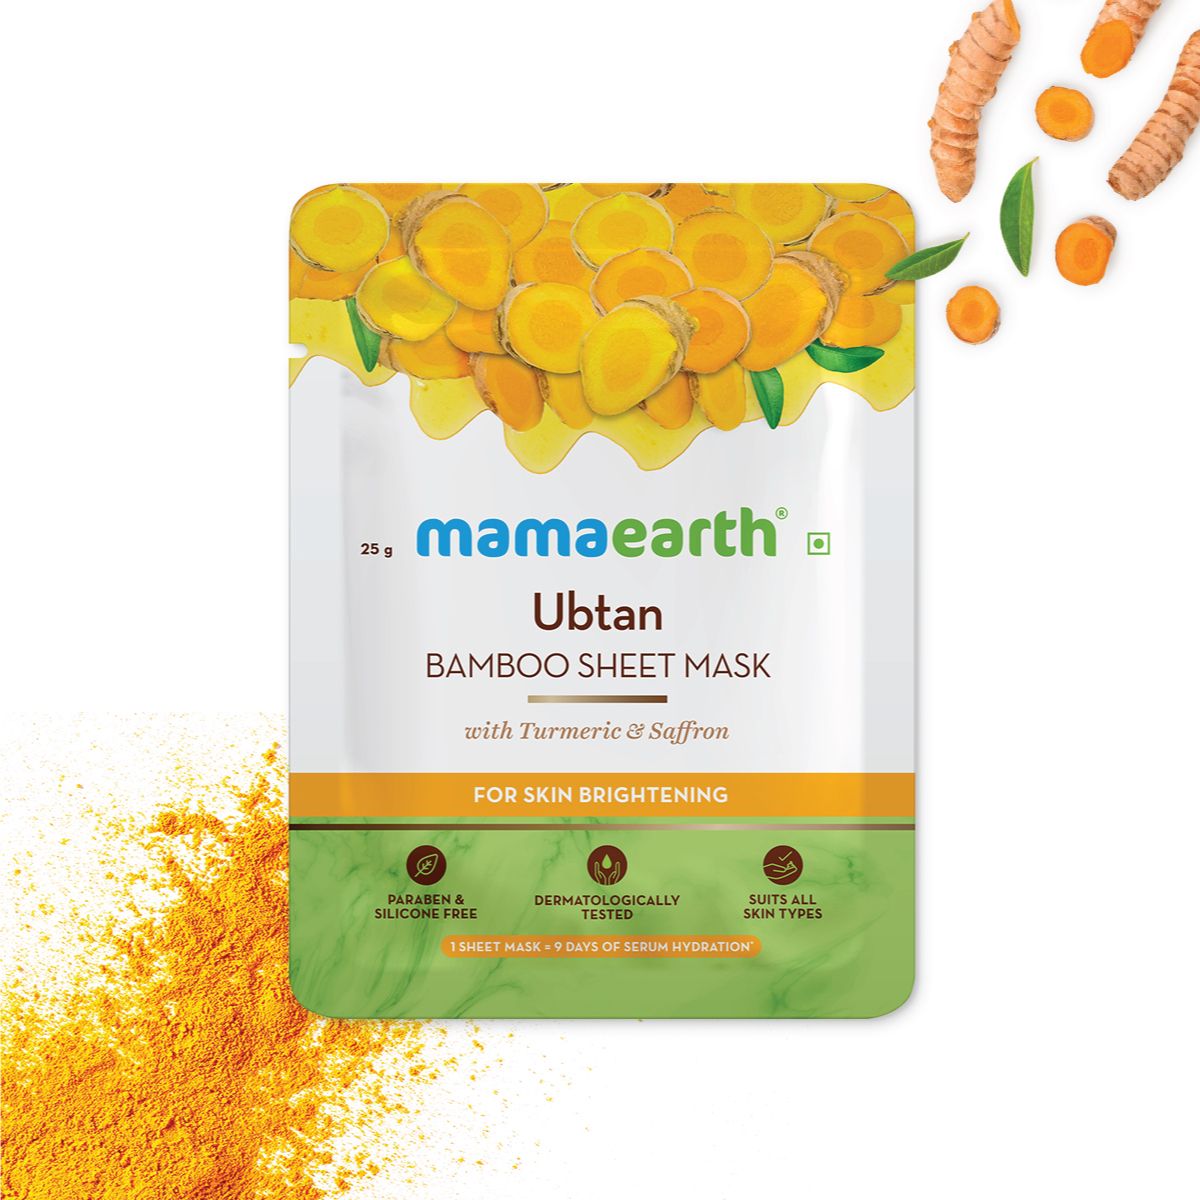 Mamaearth Ubtan Bamboo Sheet Mask Better Than Others Available in The Market 